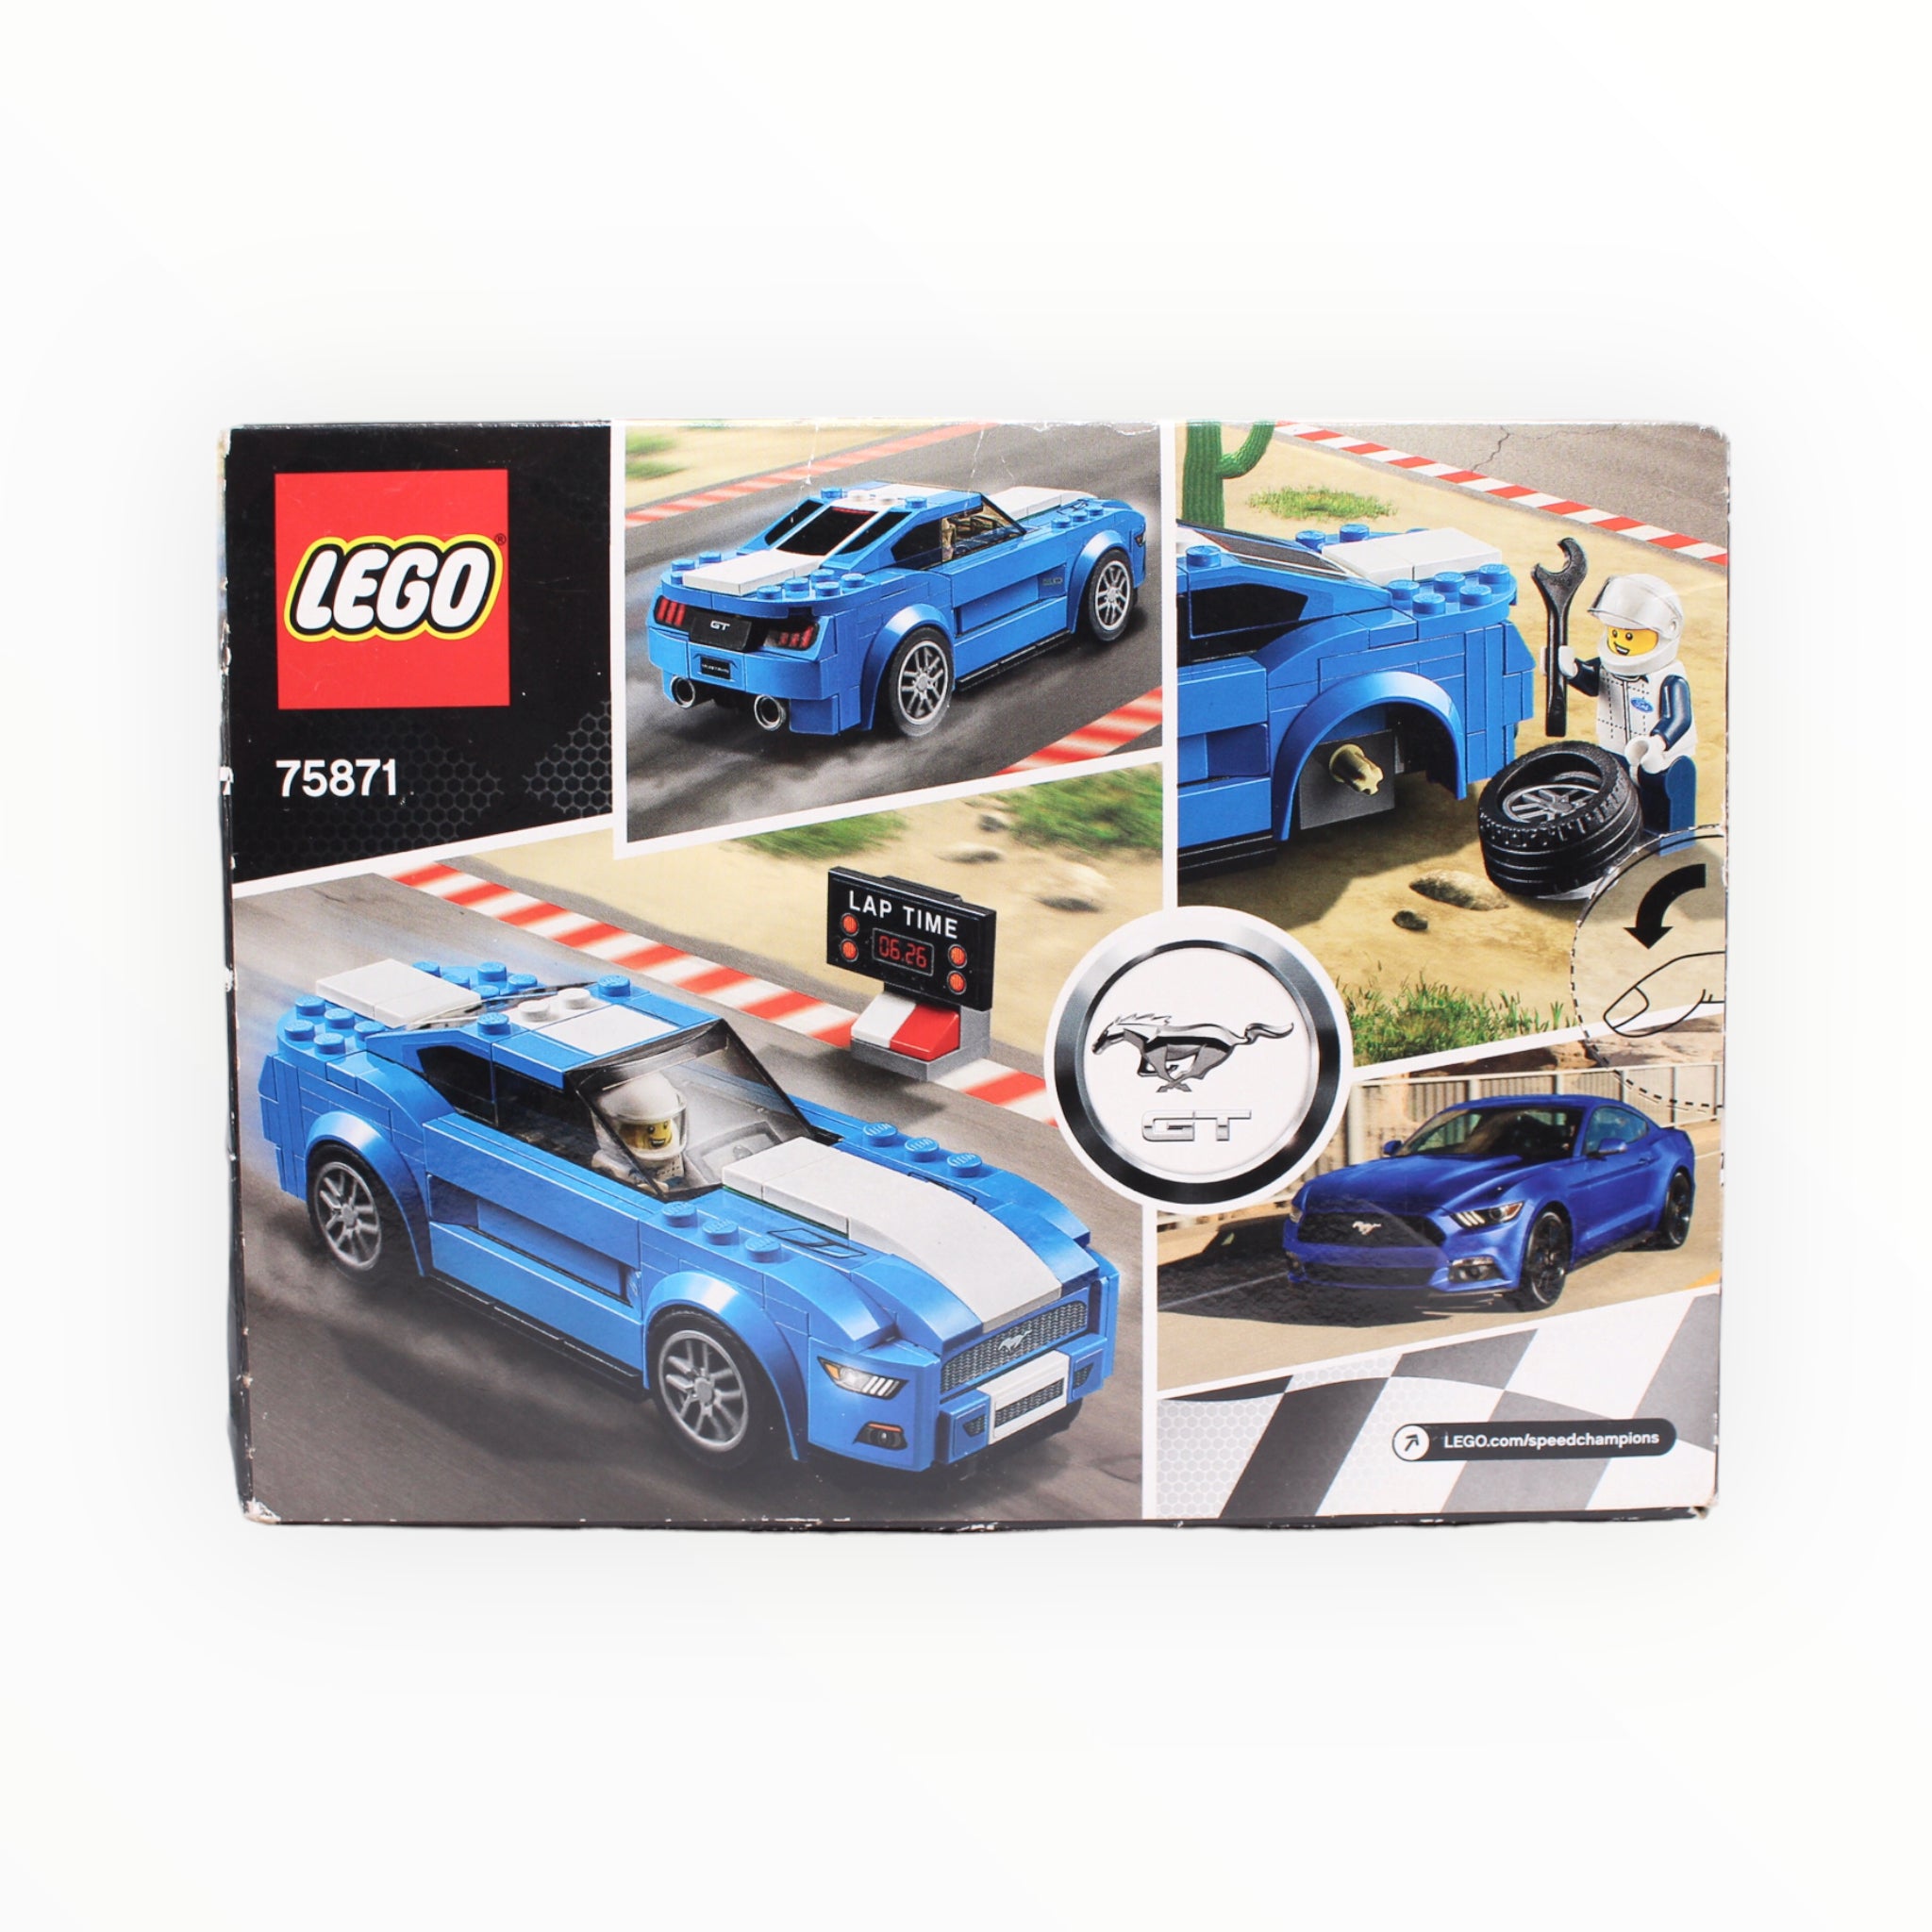 Retired Set 75871 Speed Champions Ford Mustang GT